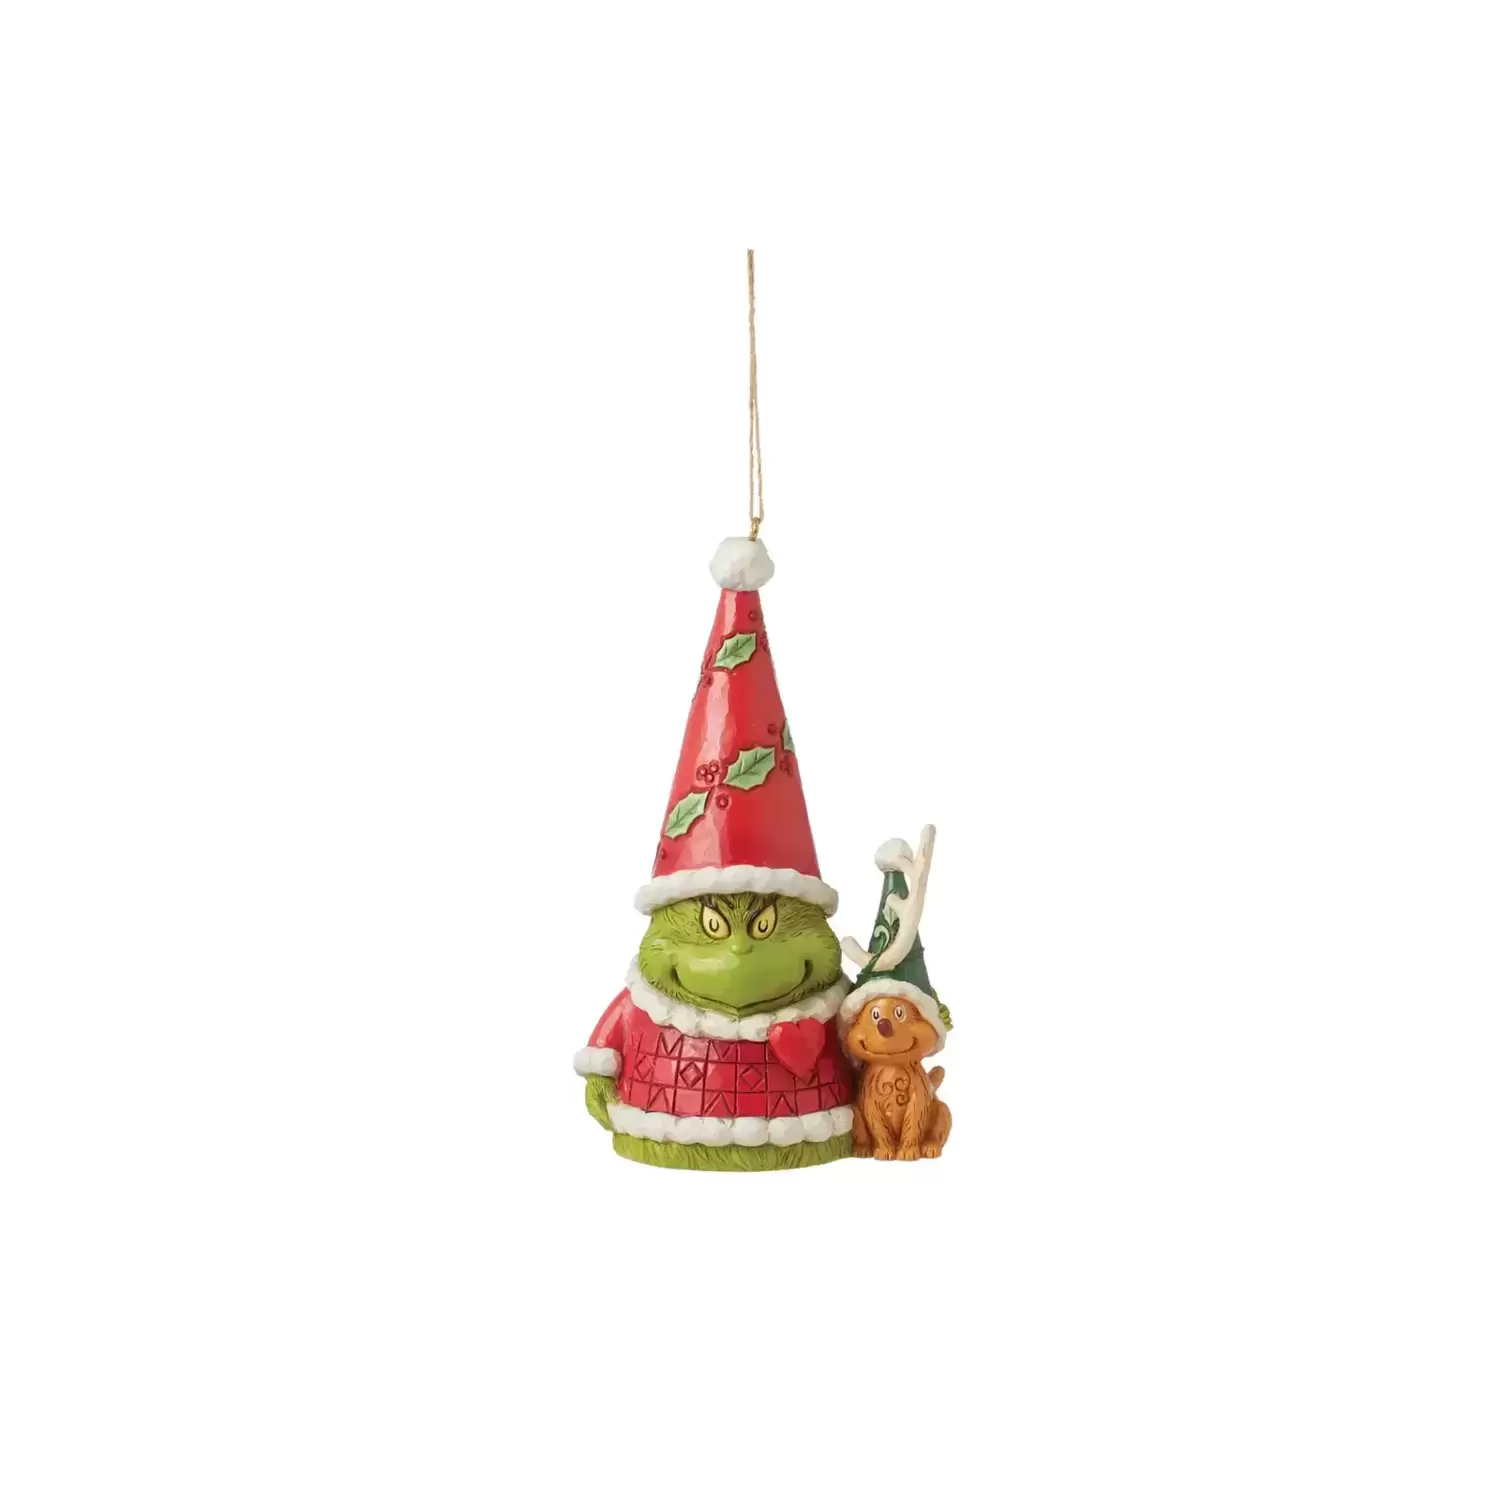 Dr Seuss by Jim Shore - Grinch Gnome with Max - Ornament